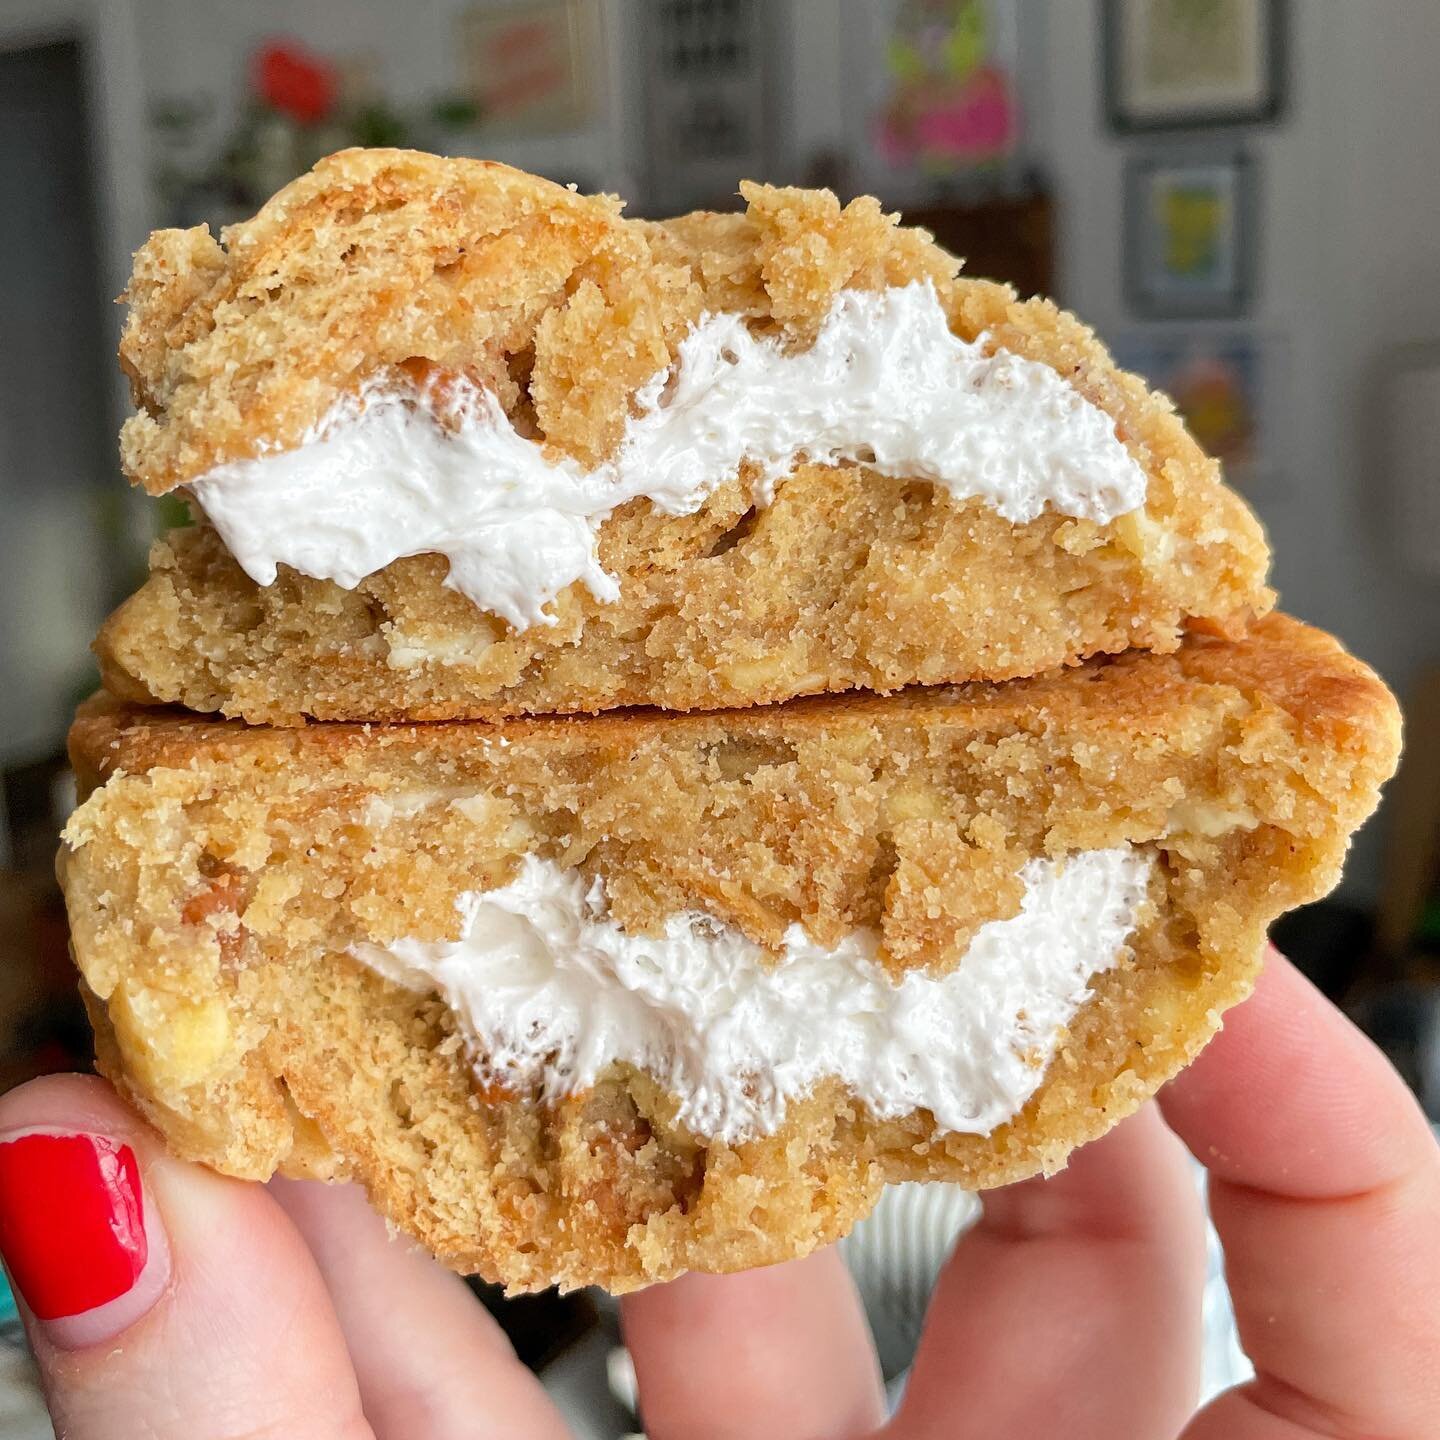 Remember that oatmeal cream pie from elementary school? Well this is them all grown up. 
📍: @bakdbakery 
.
.
.
.
.
.
.
#dessert #dessertbae #cookies #dessertsofinstagram